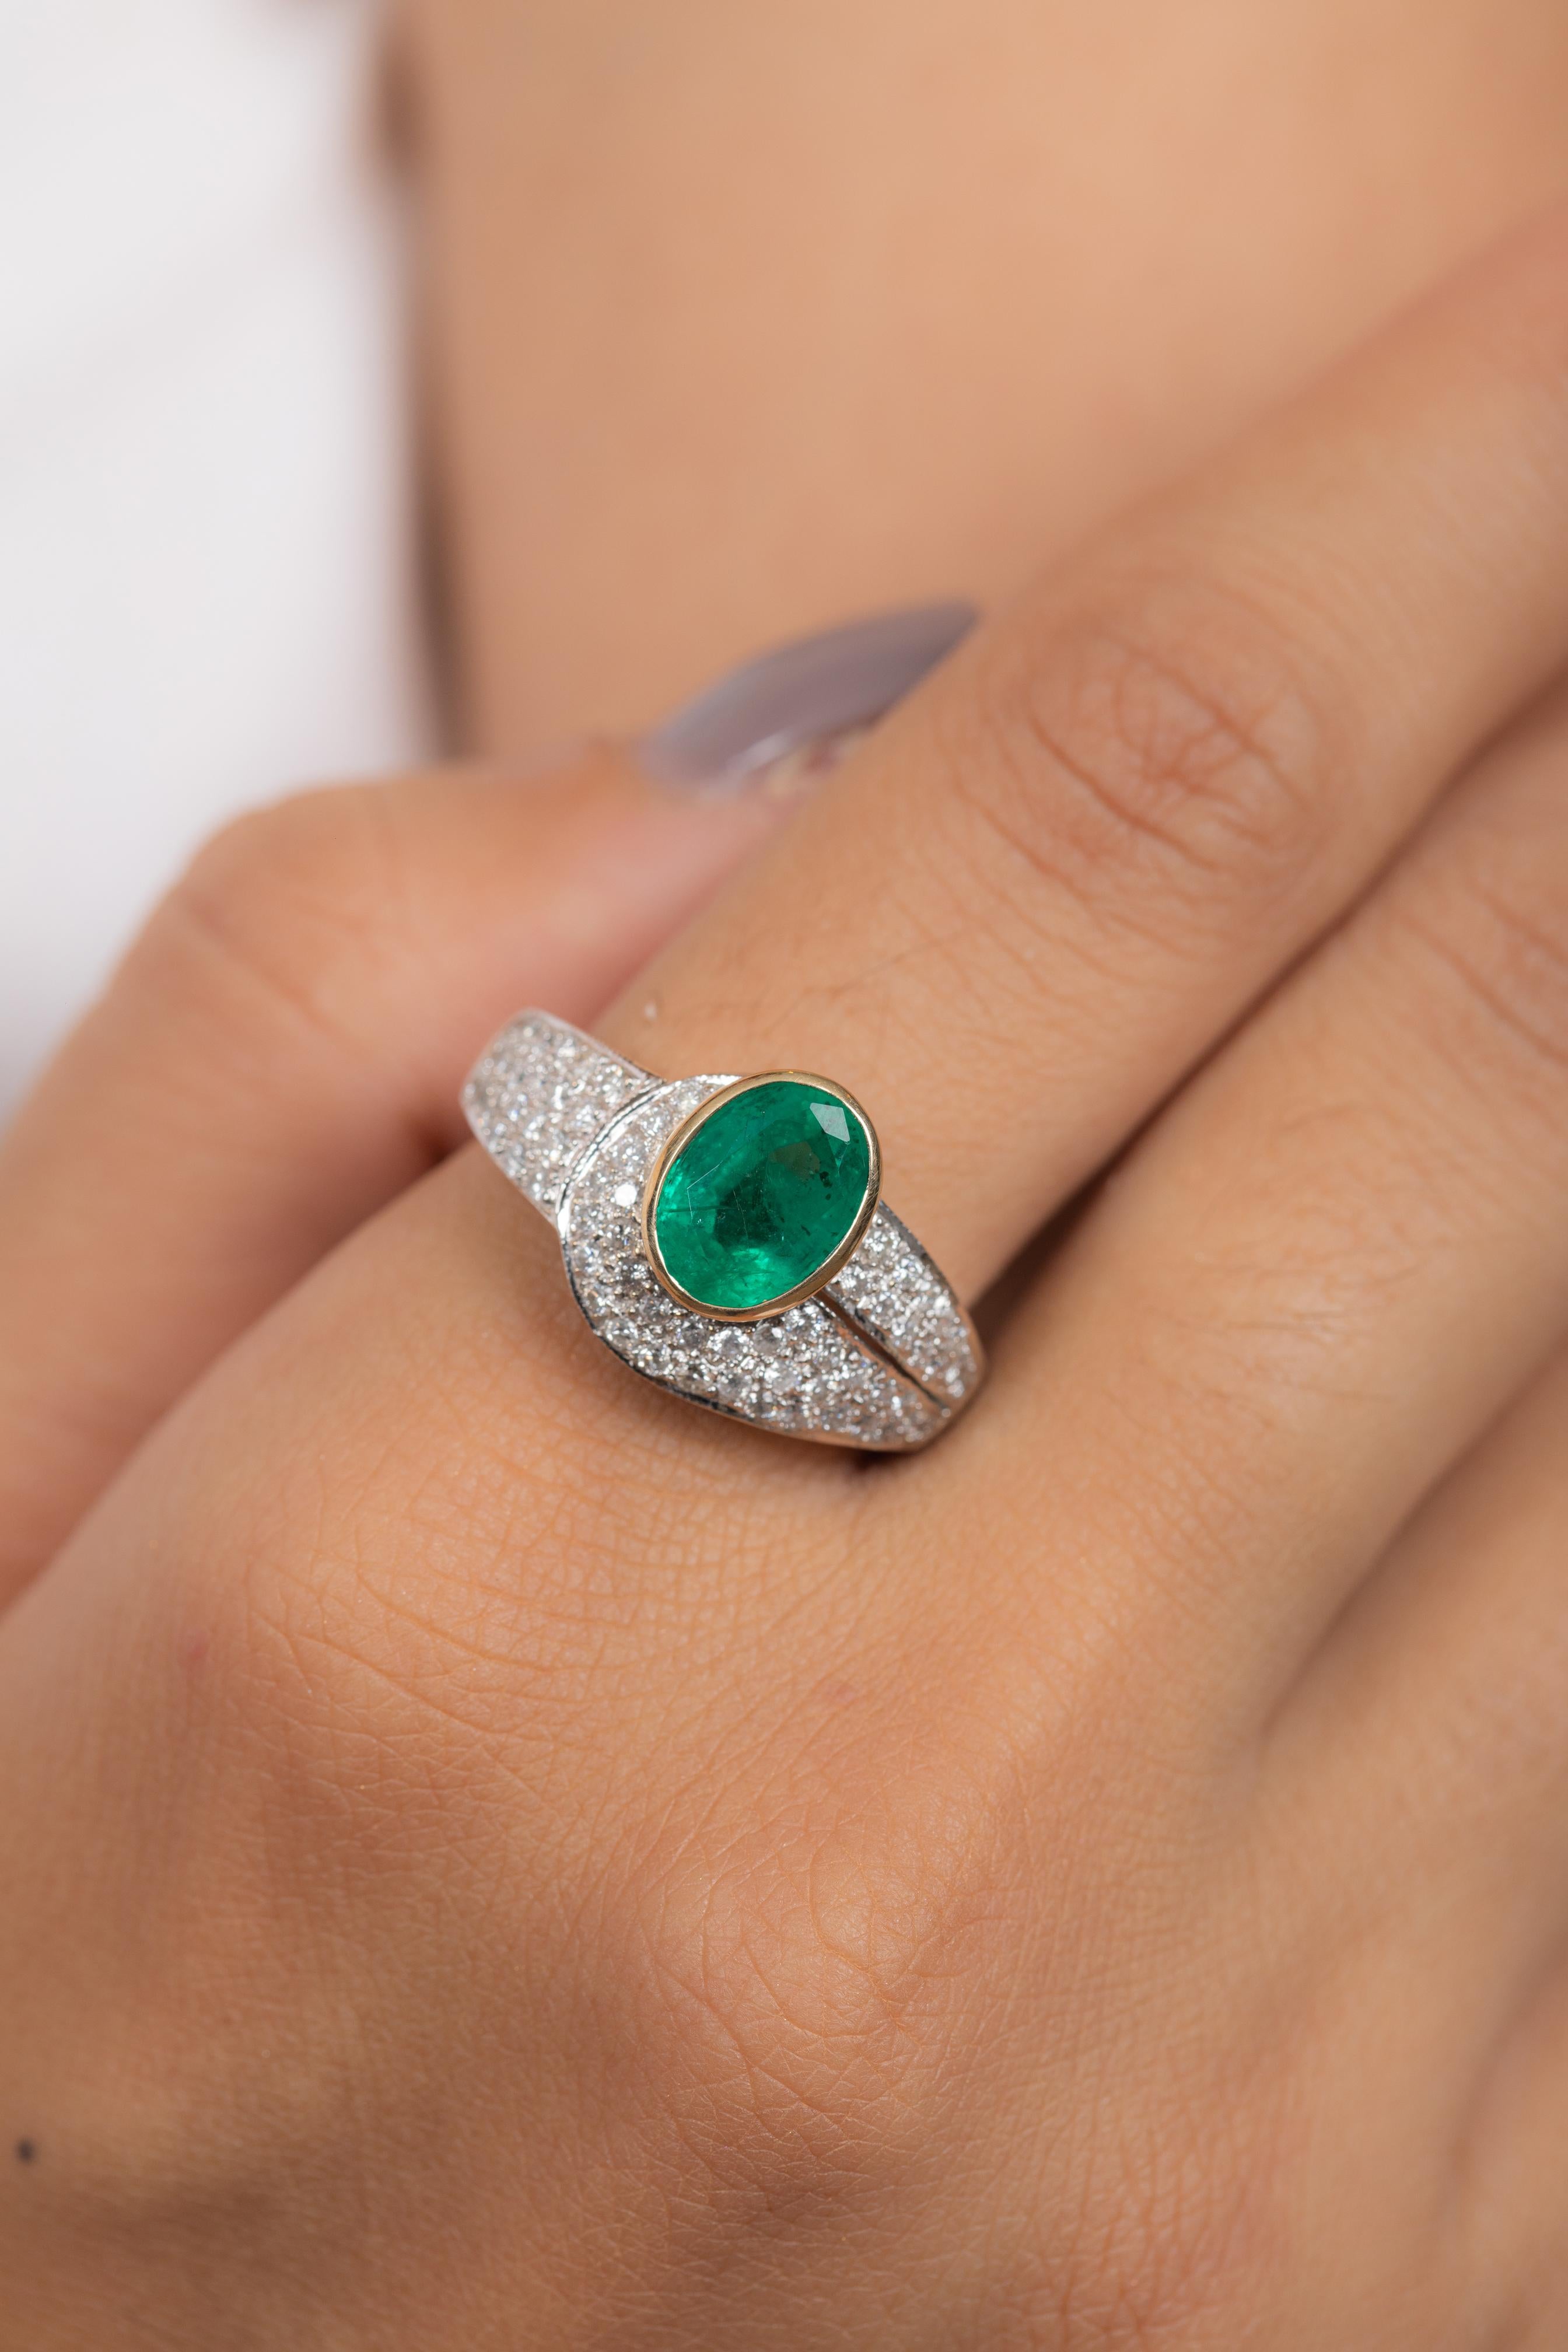 For Sale:  2.45 Carat Emerald and Diamond Ring in 18K White Gold  3